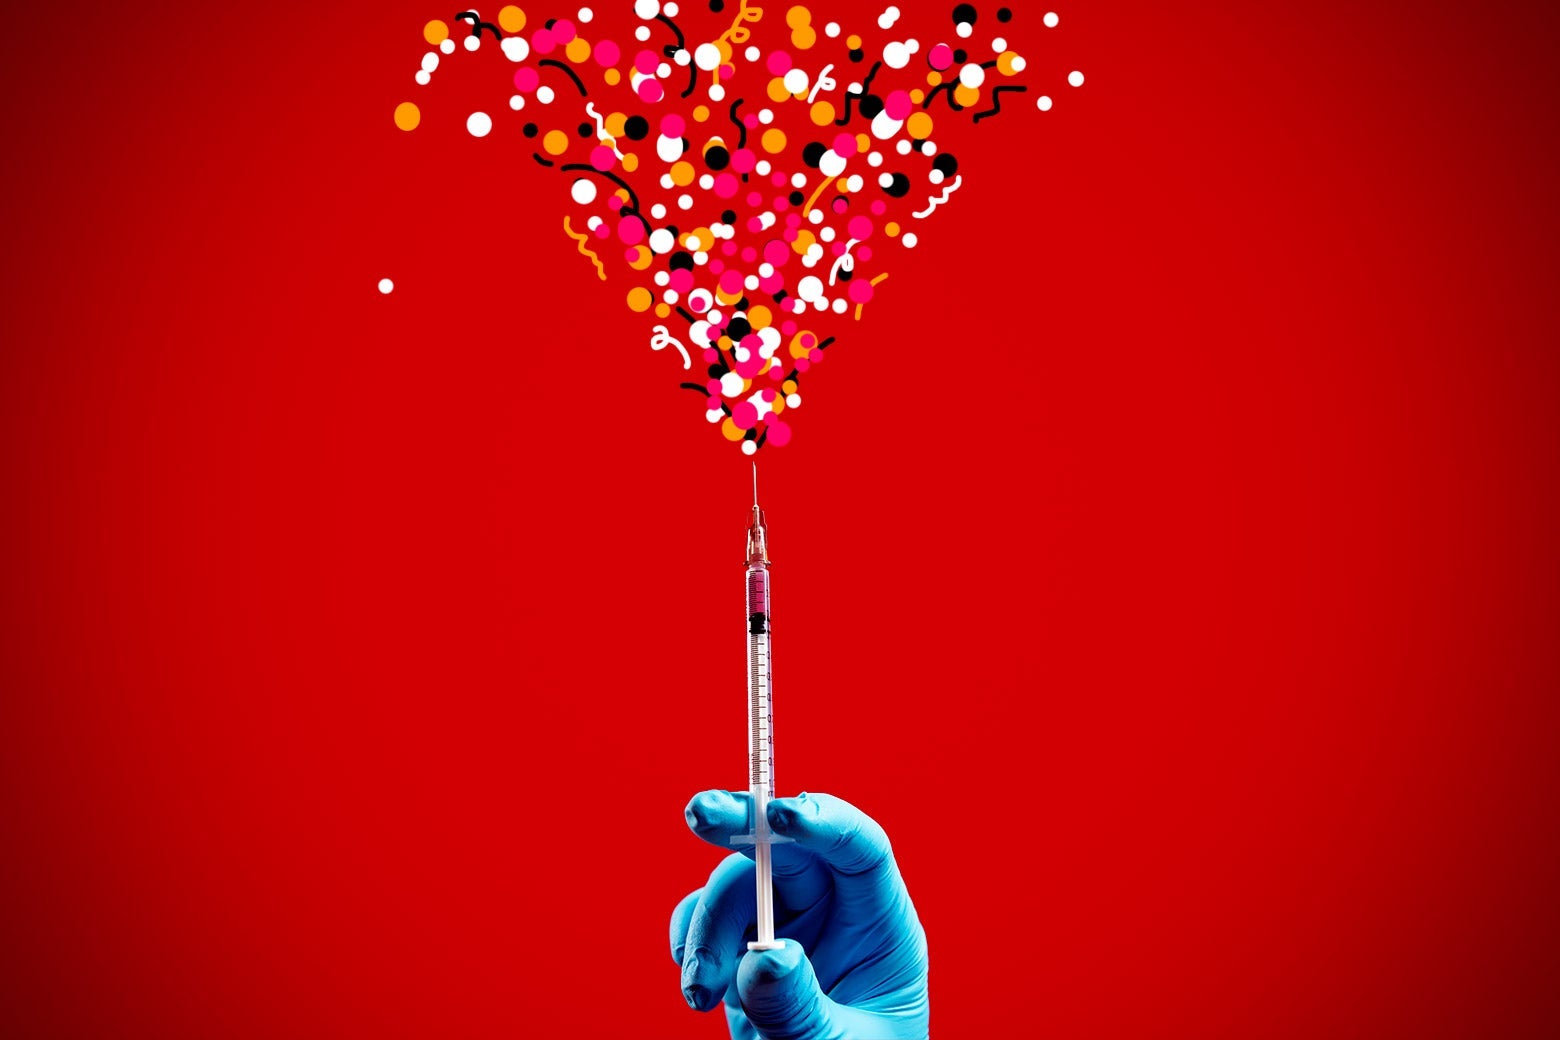 A syringe ejecting vaccine that turns into confetti against a red background.